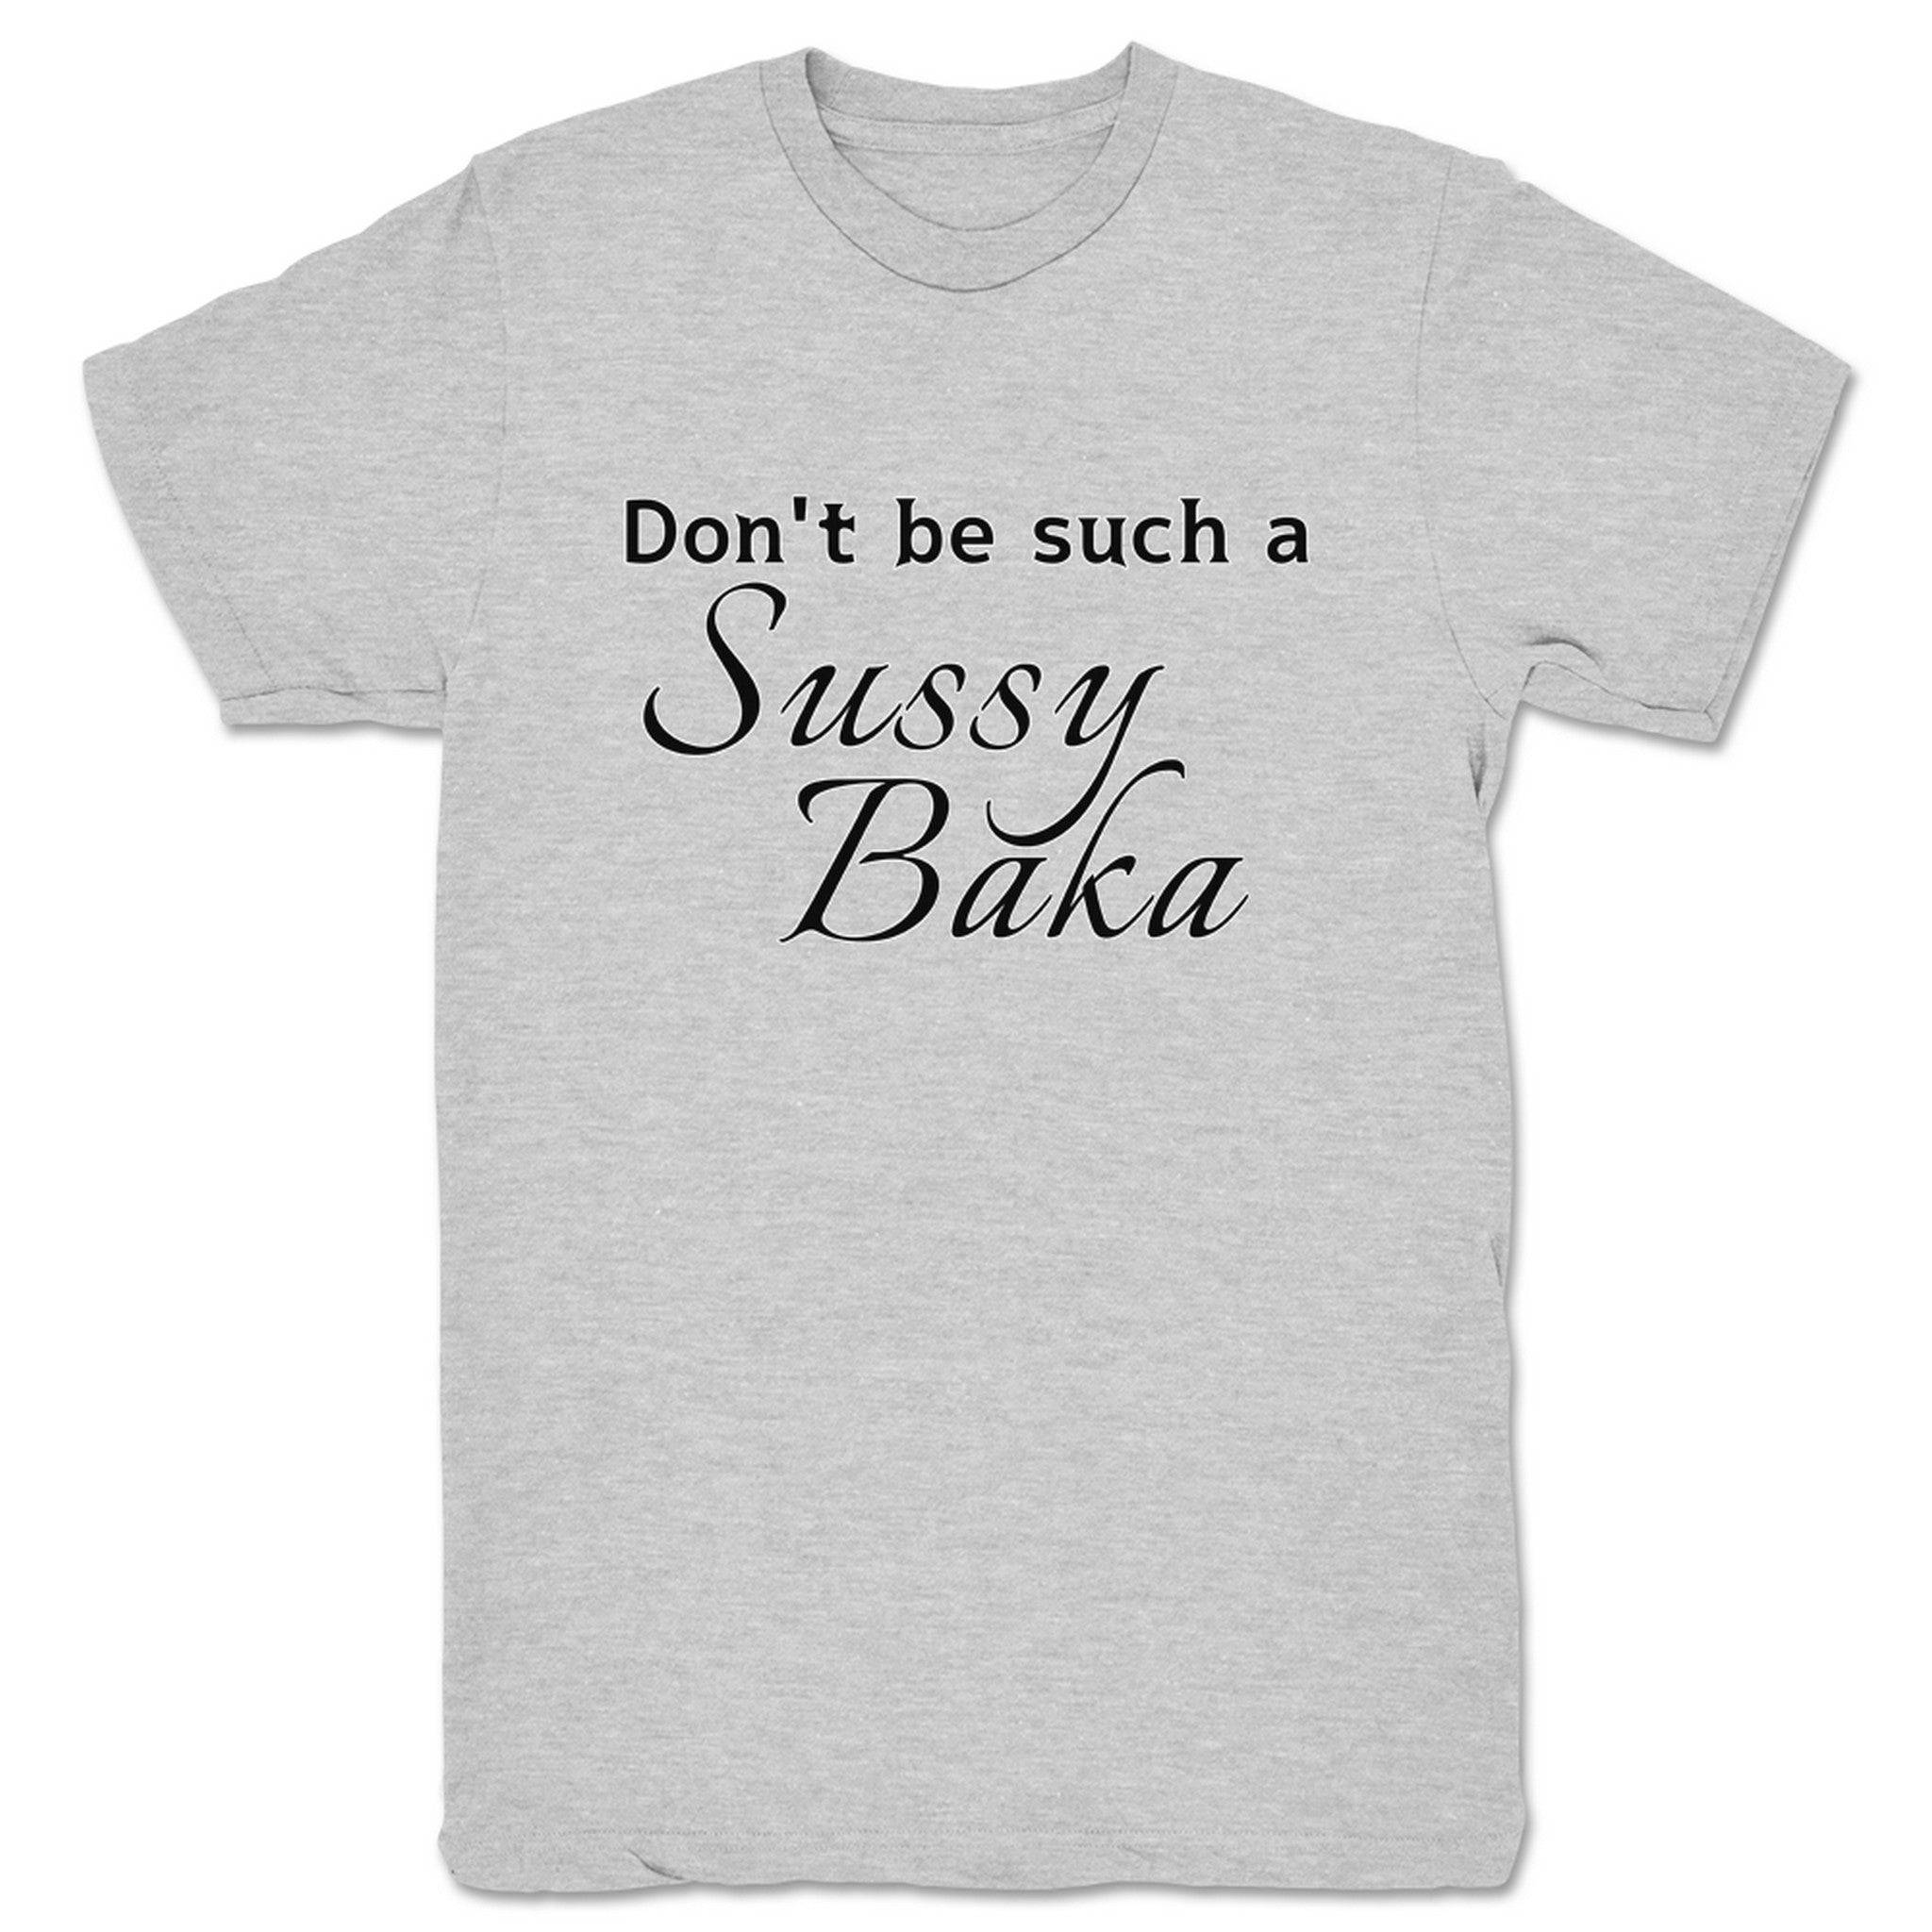 What is Sussy Baka? 